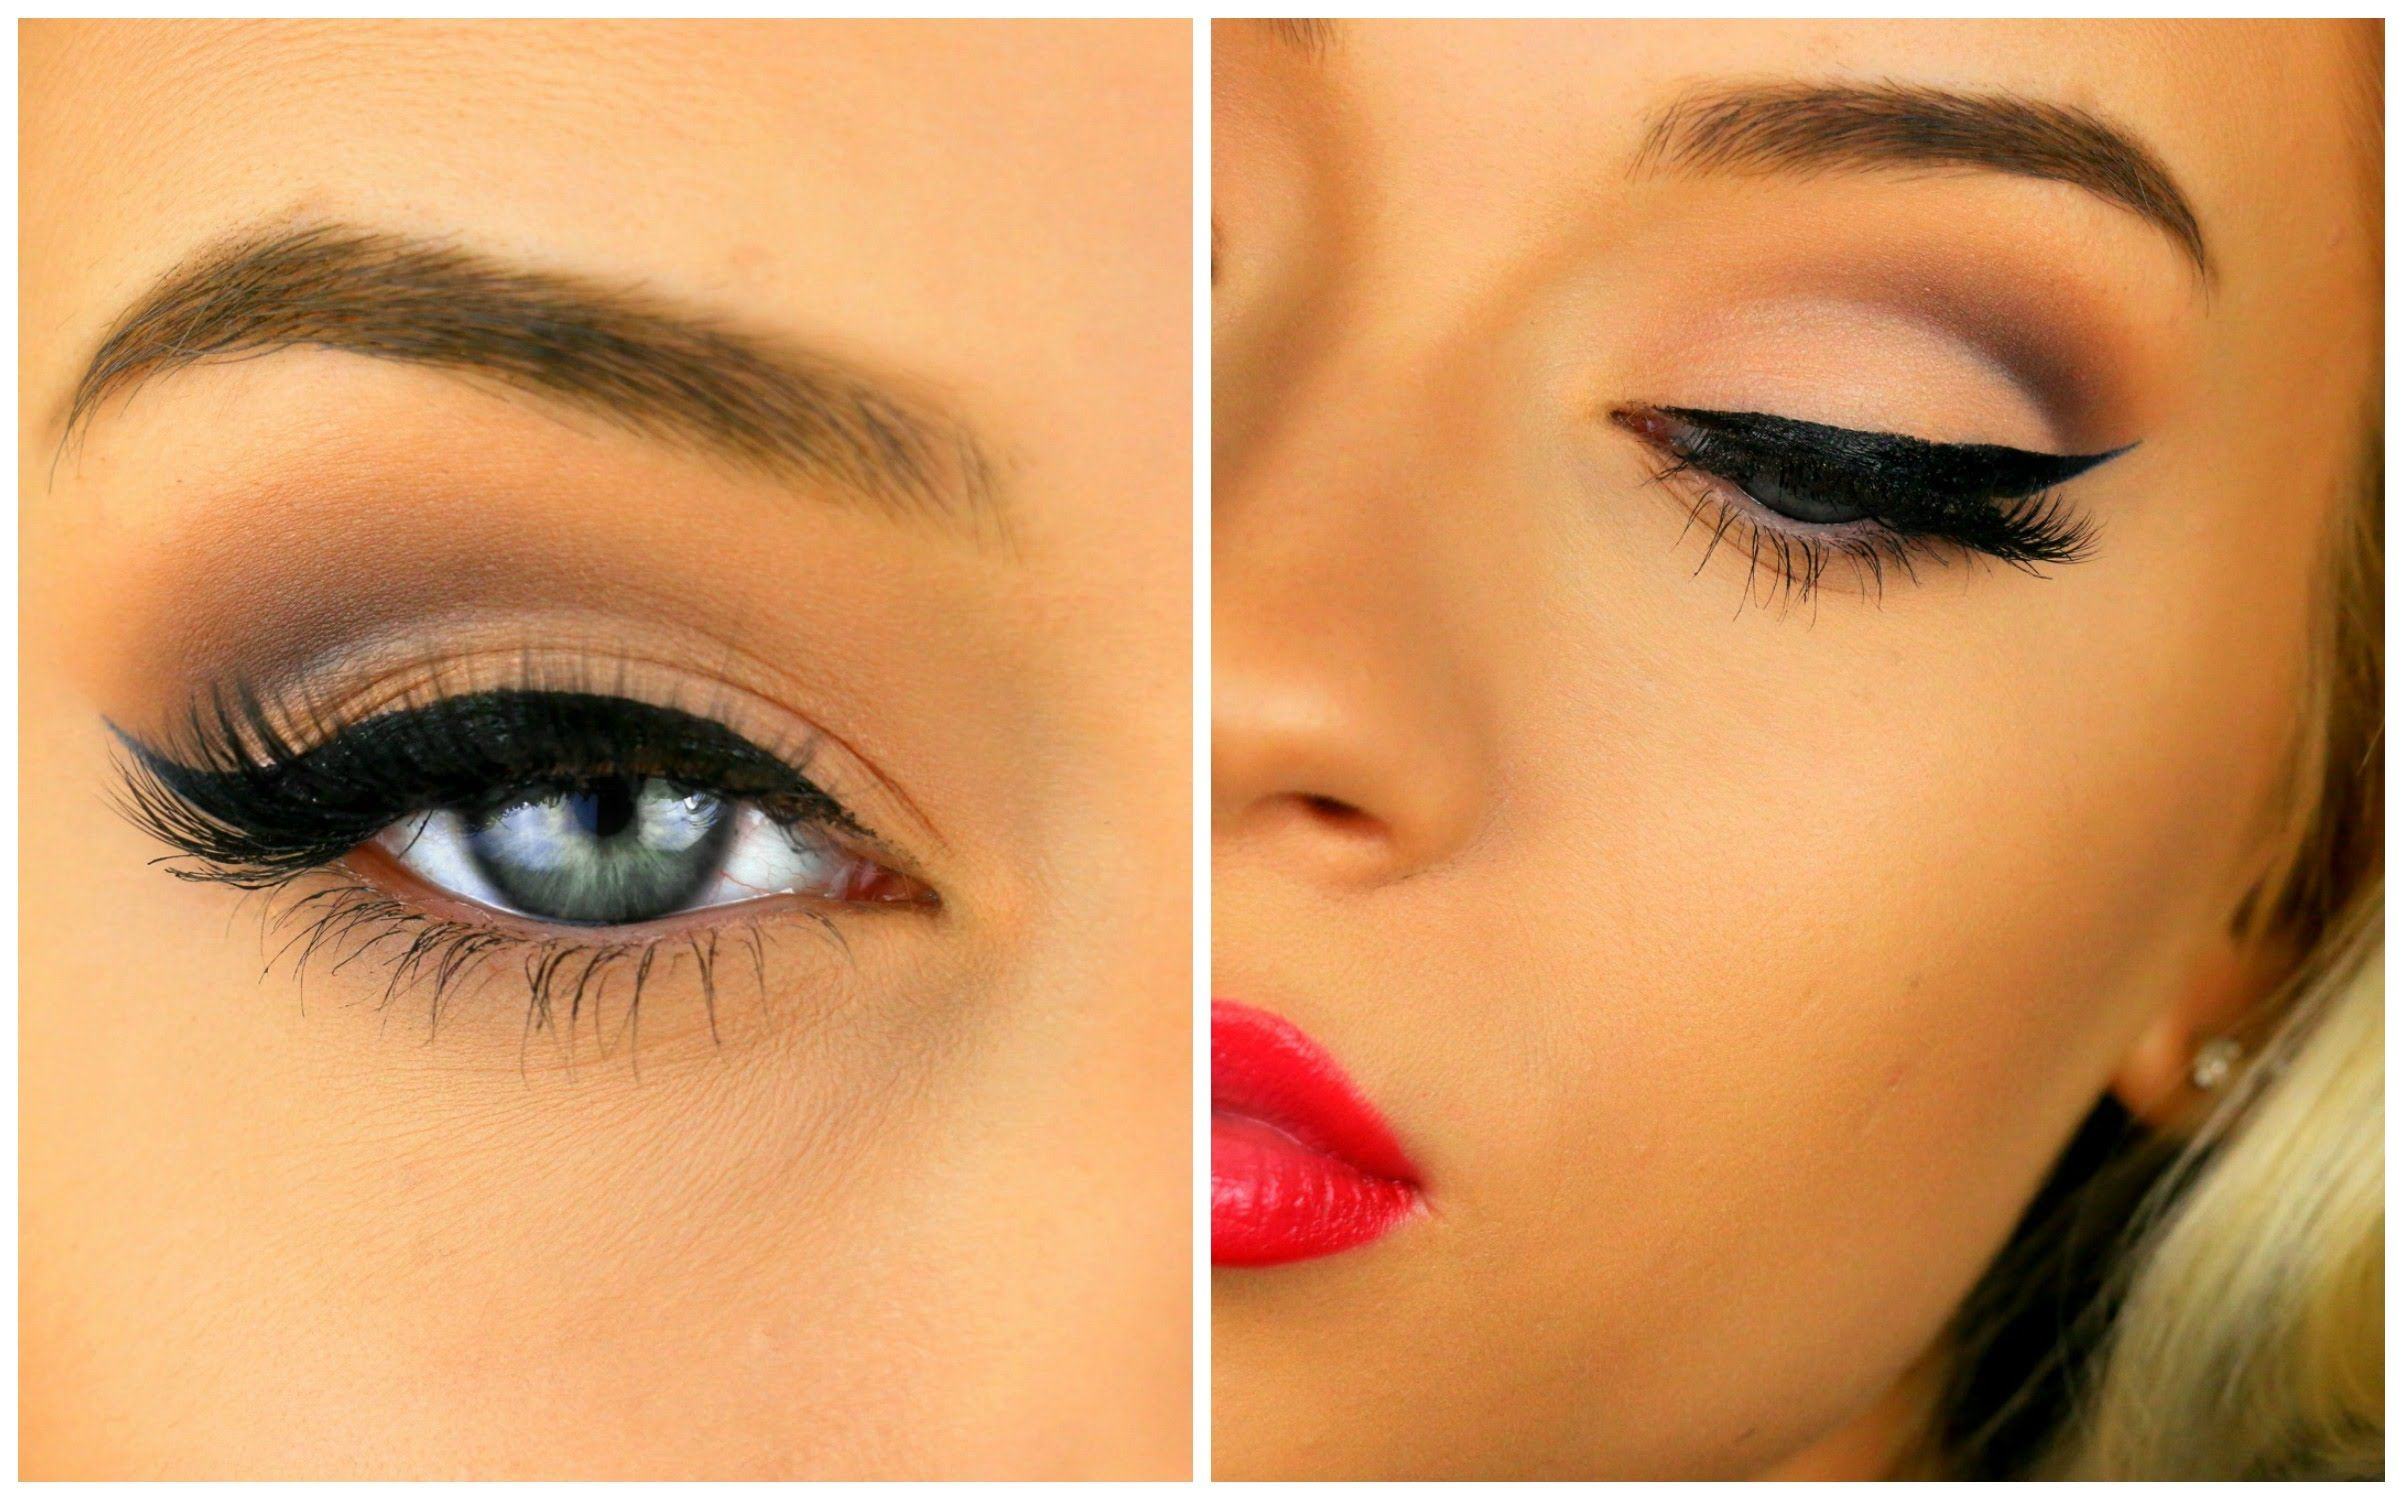 Makeup For Hooded Eyes 6 Tips To Applying Eyeshadow For Hooded Eyelids That You Probably